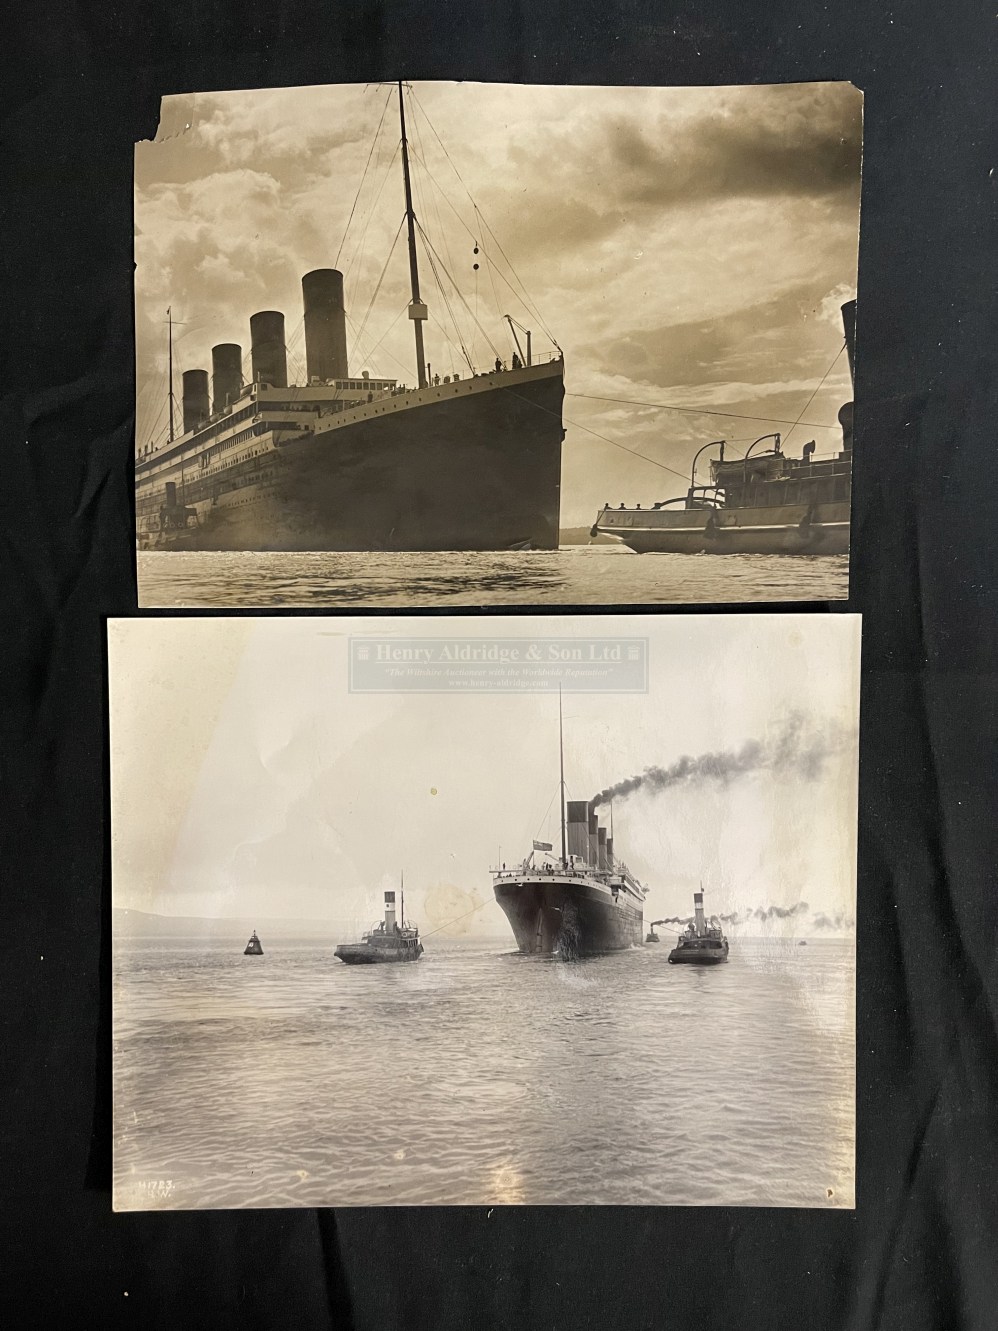 MARINE PHOTOGRAPHS: Original image of Olympic under tow, Harland and Wolff photograph of Titanic